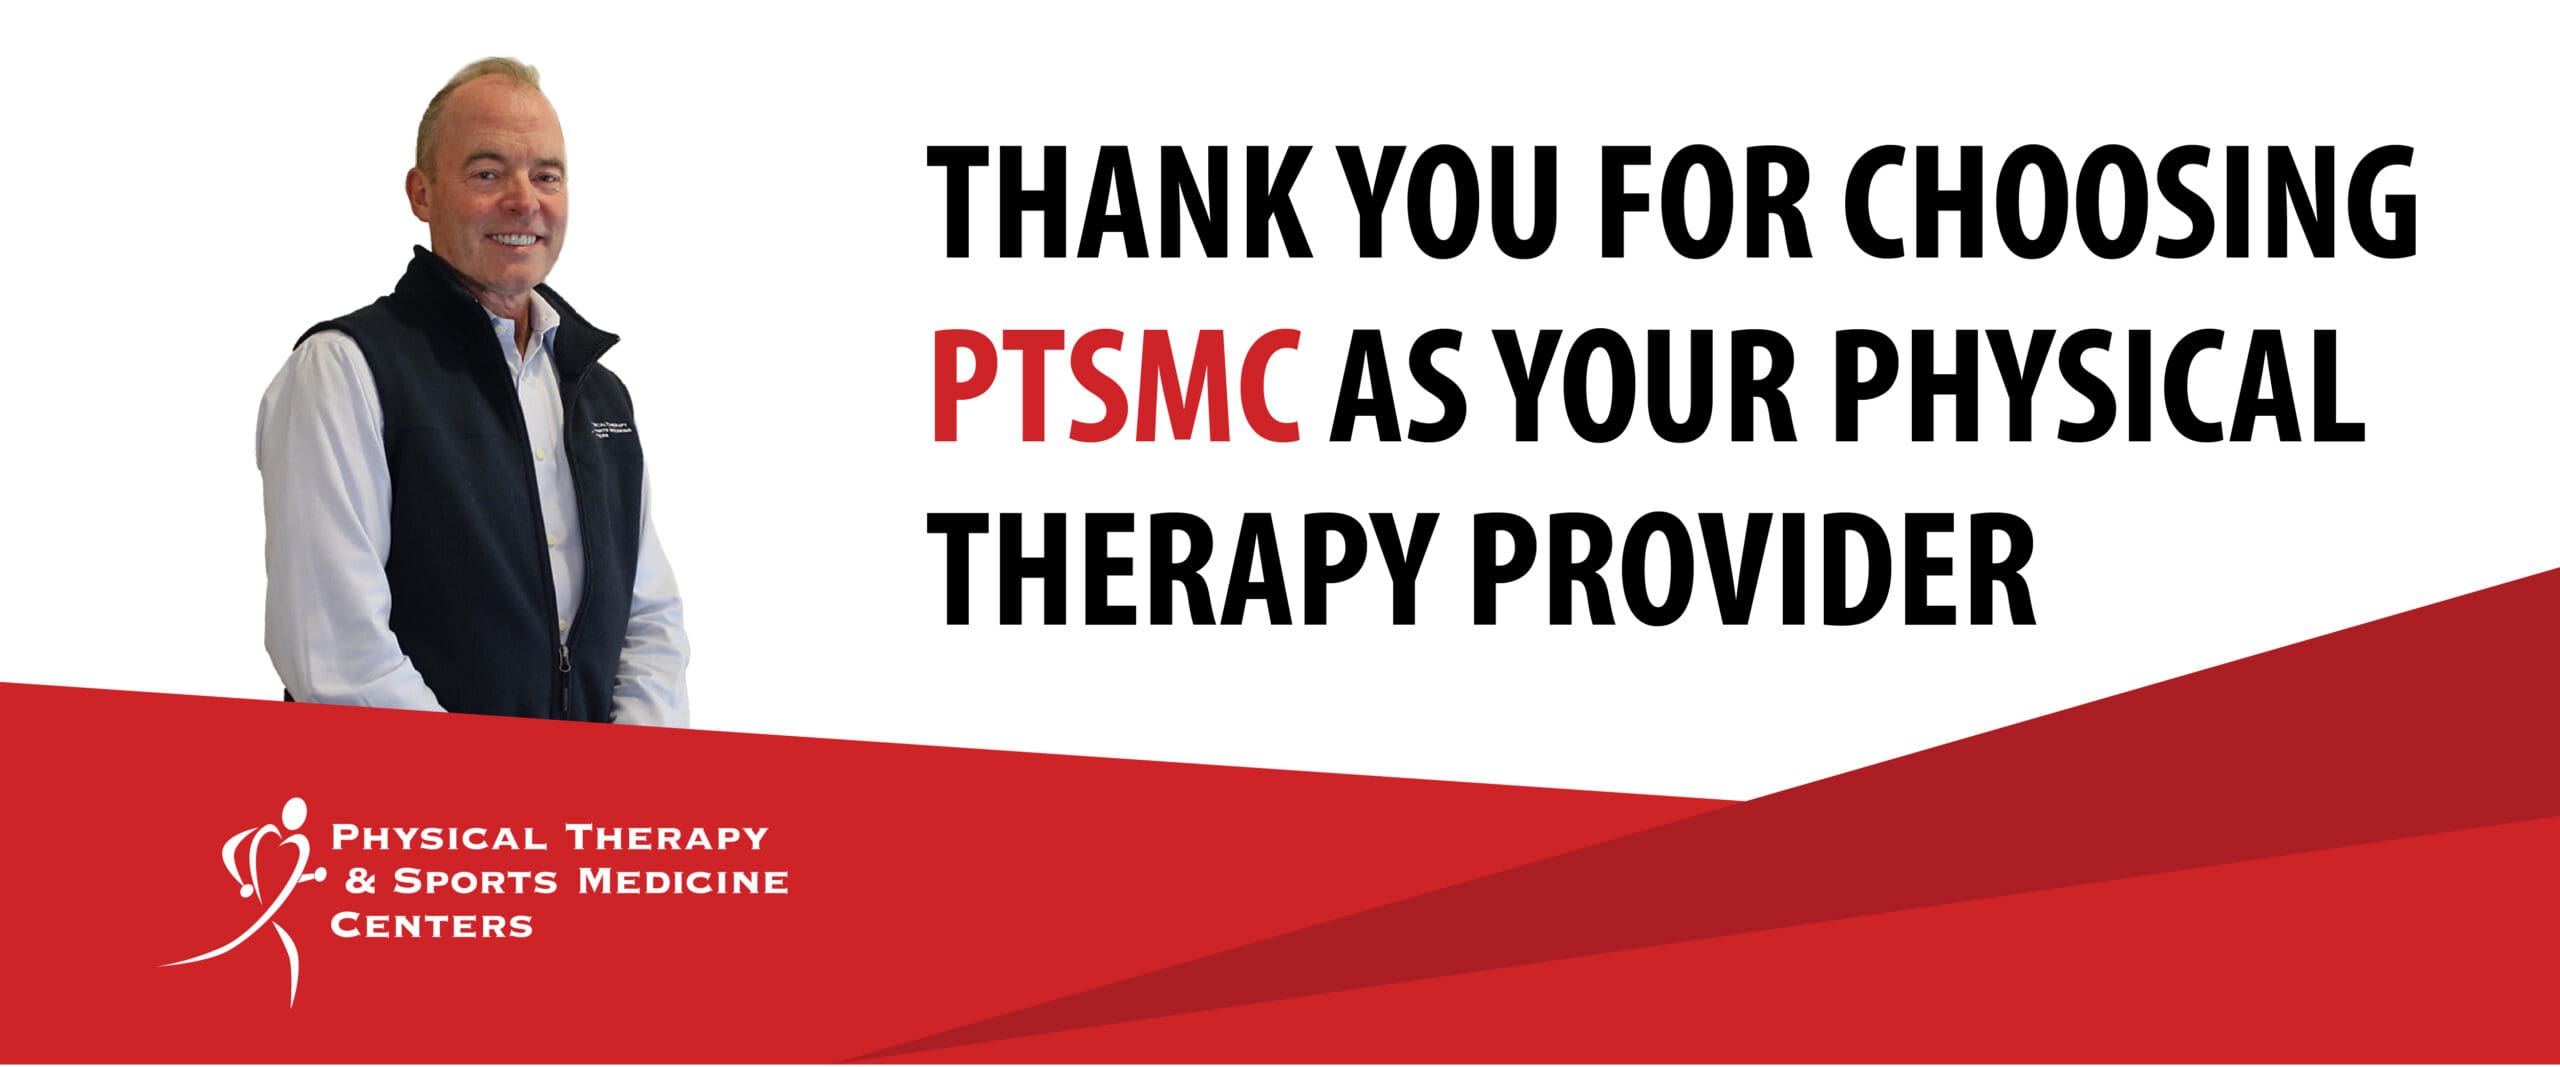 Thank you for choosing PTSMC as your physical therapy provider